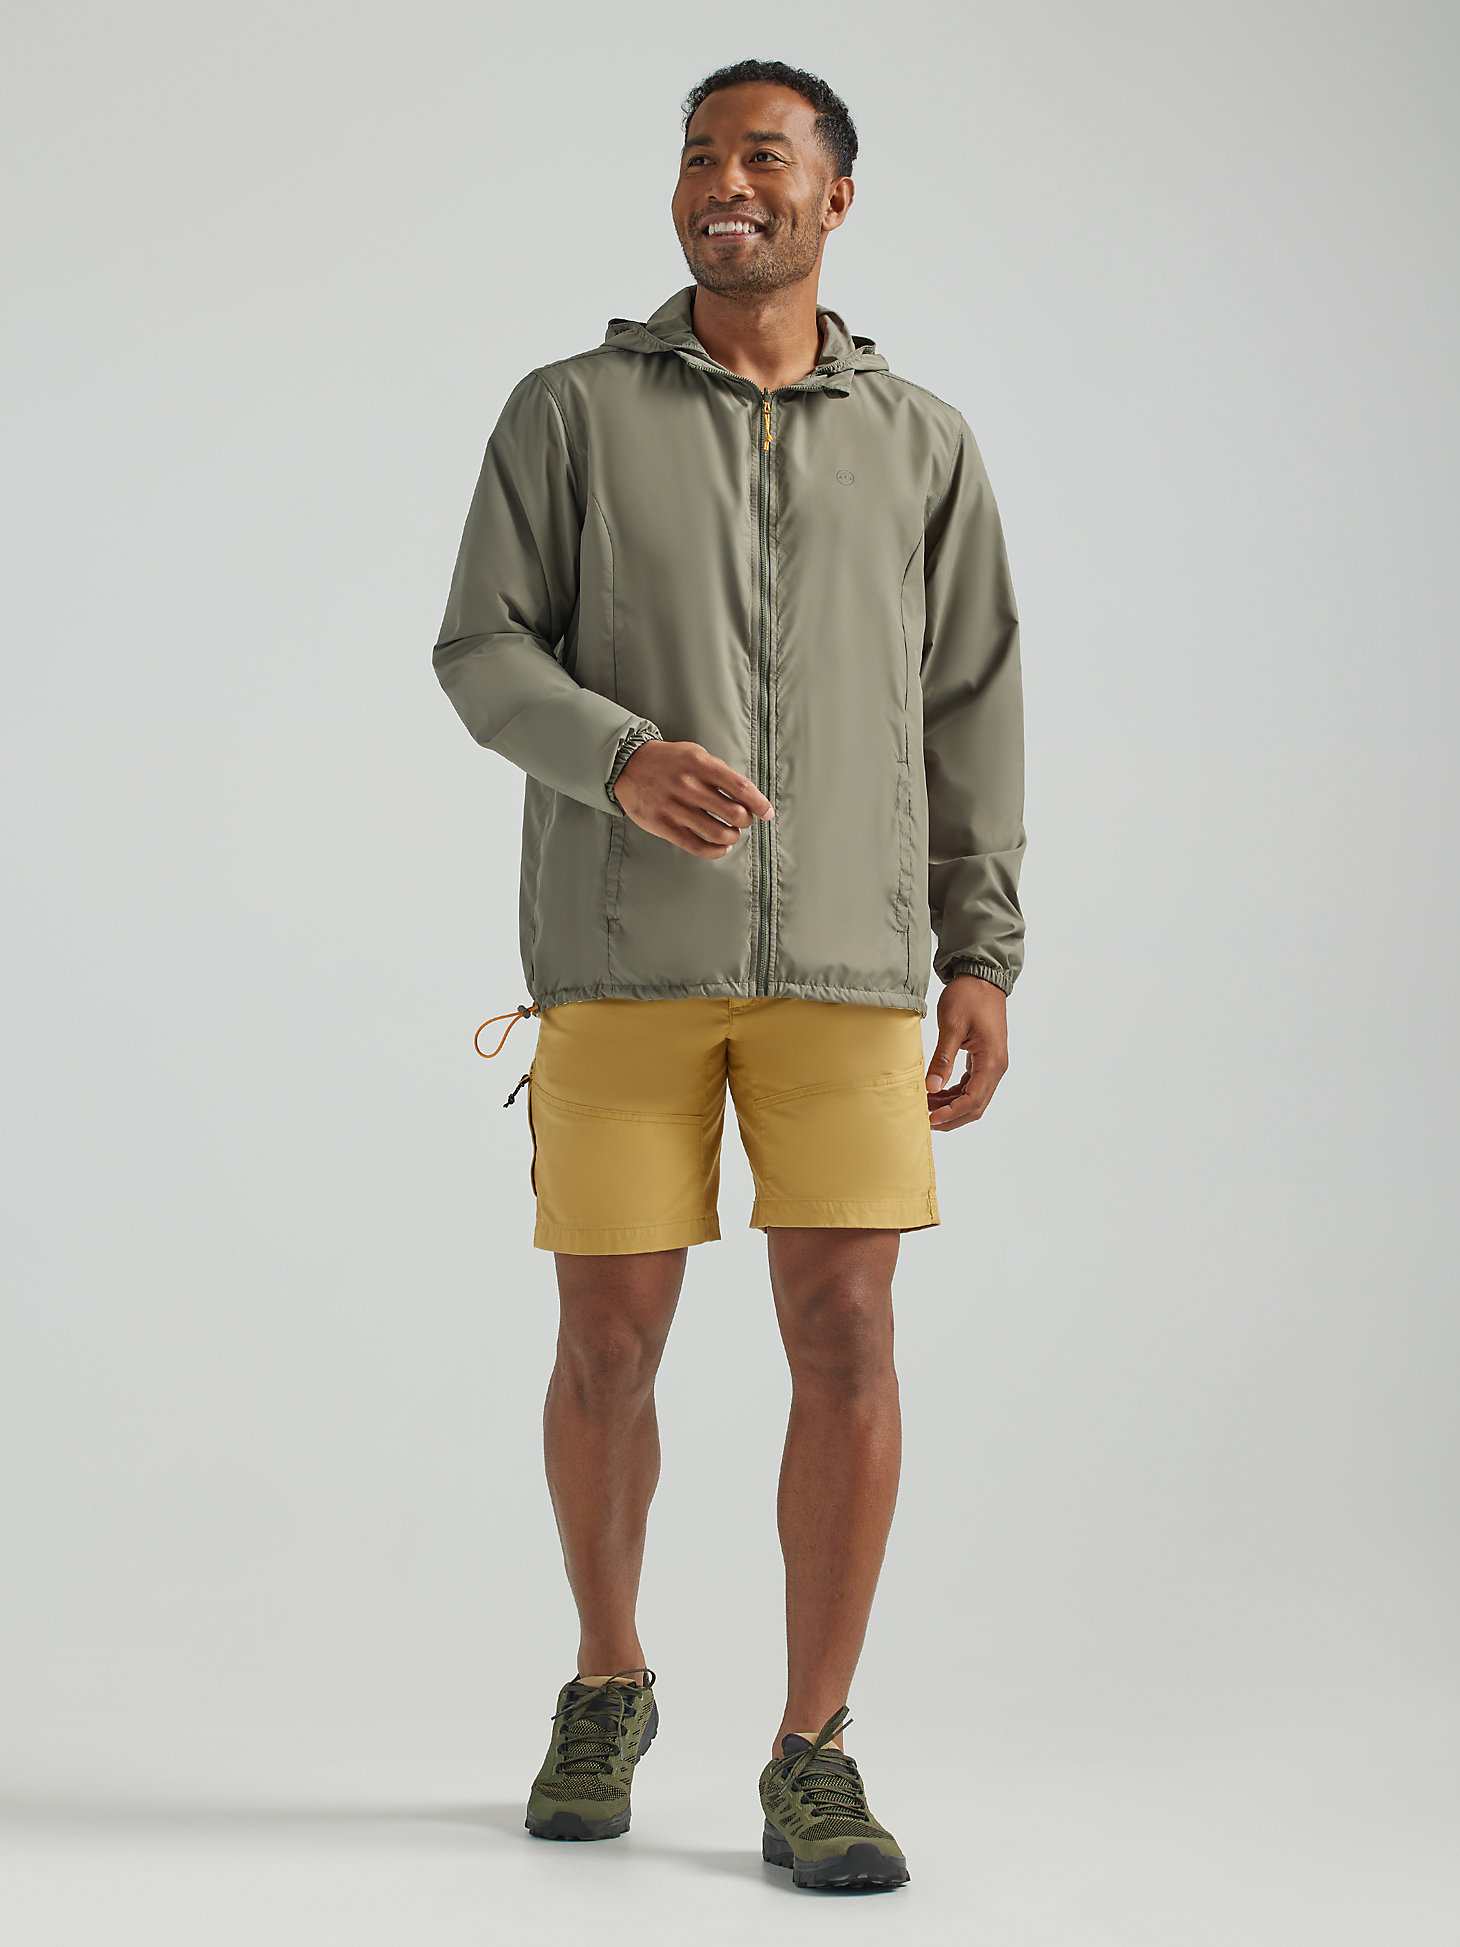 Rugged Trail Short in Antelope alternative view 1